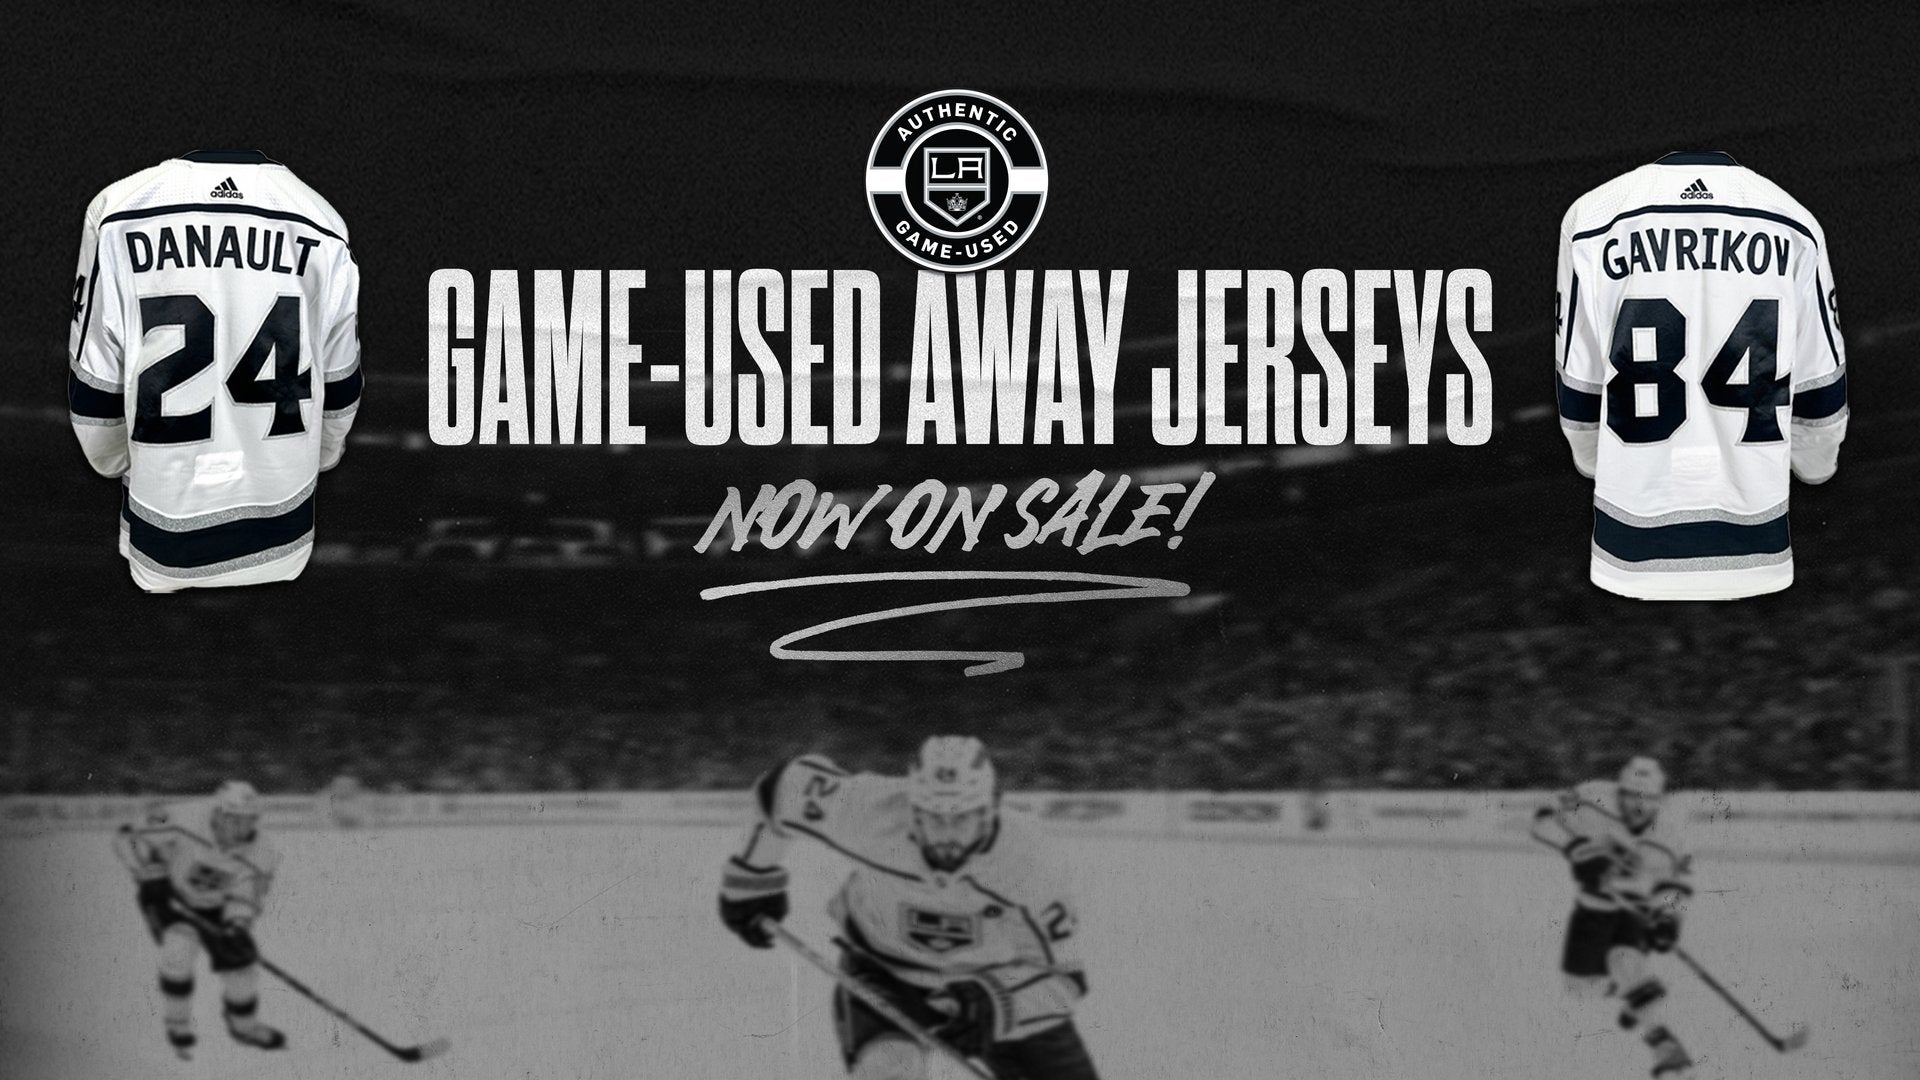 LA Kings Game-Used Merchandise and Memorabilia Powered by Adidas